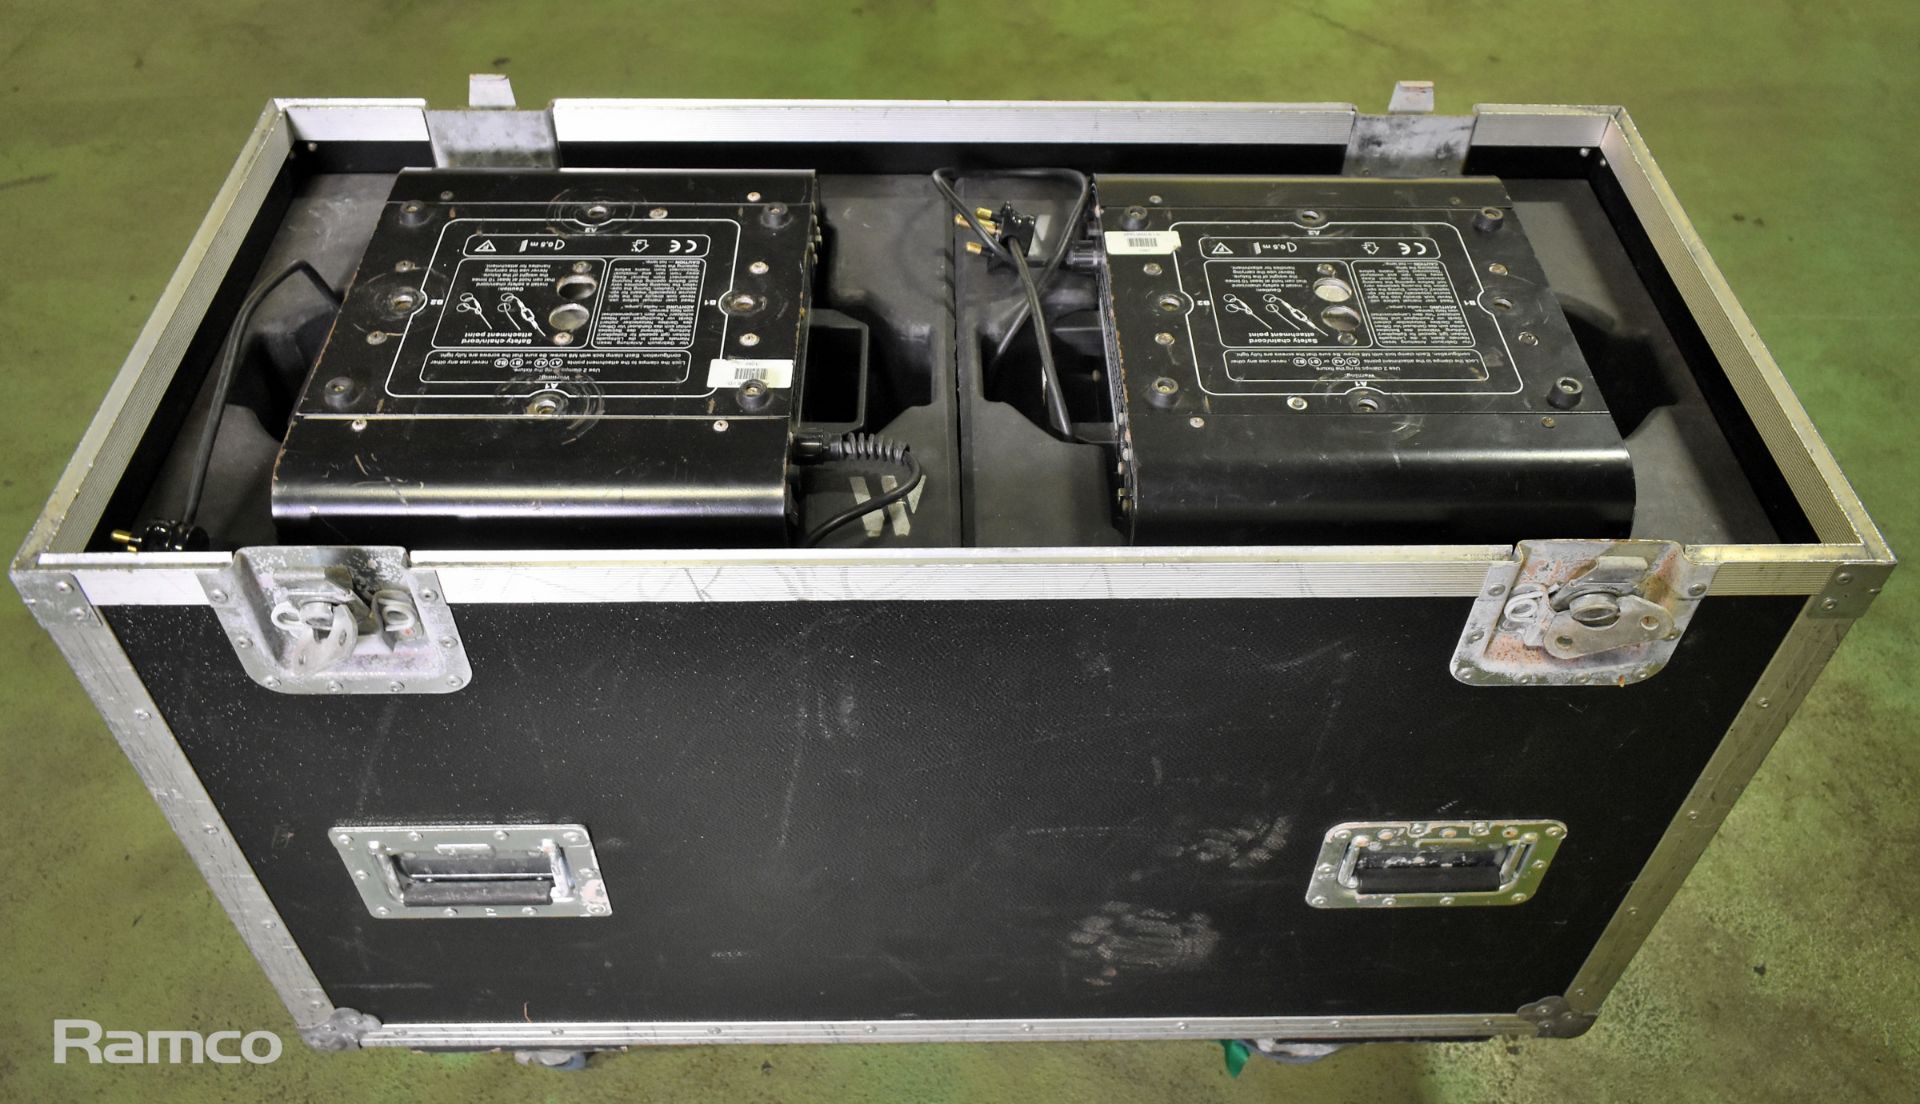 Two moving heads 640 Future light in flight case - L 1100 x W 460 x H 900mm - Image 11 of 13